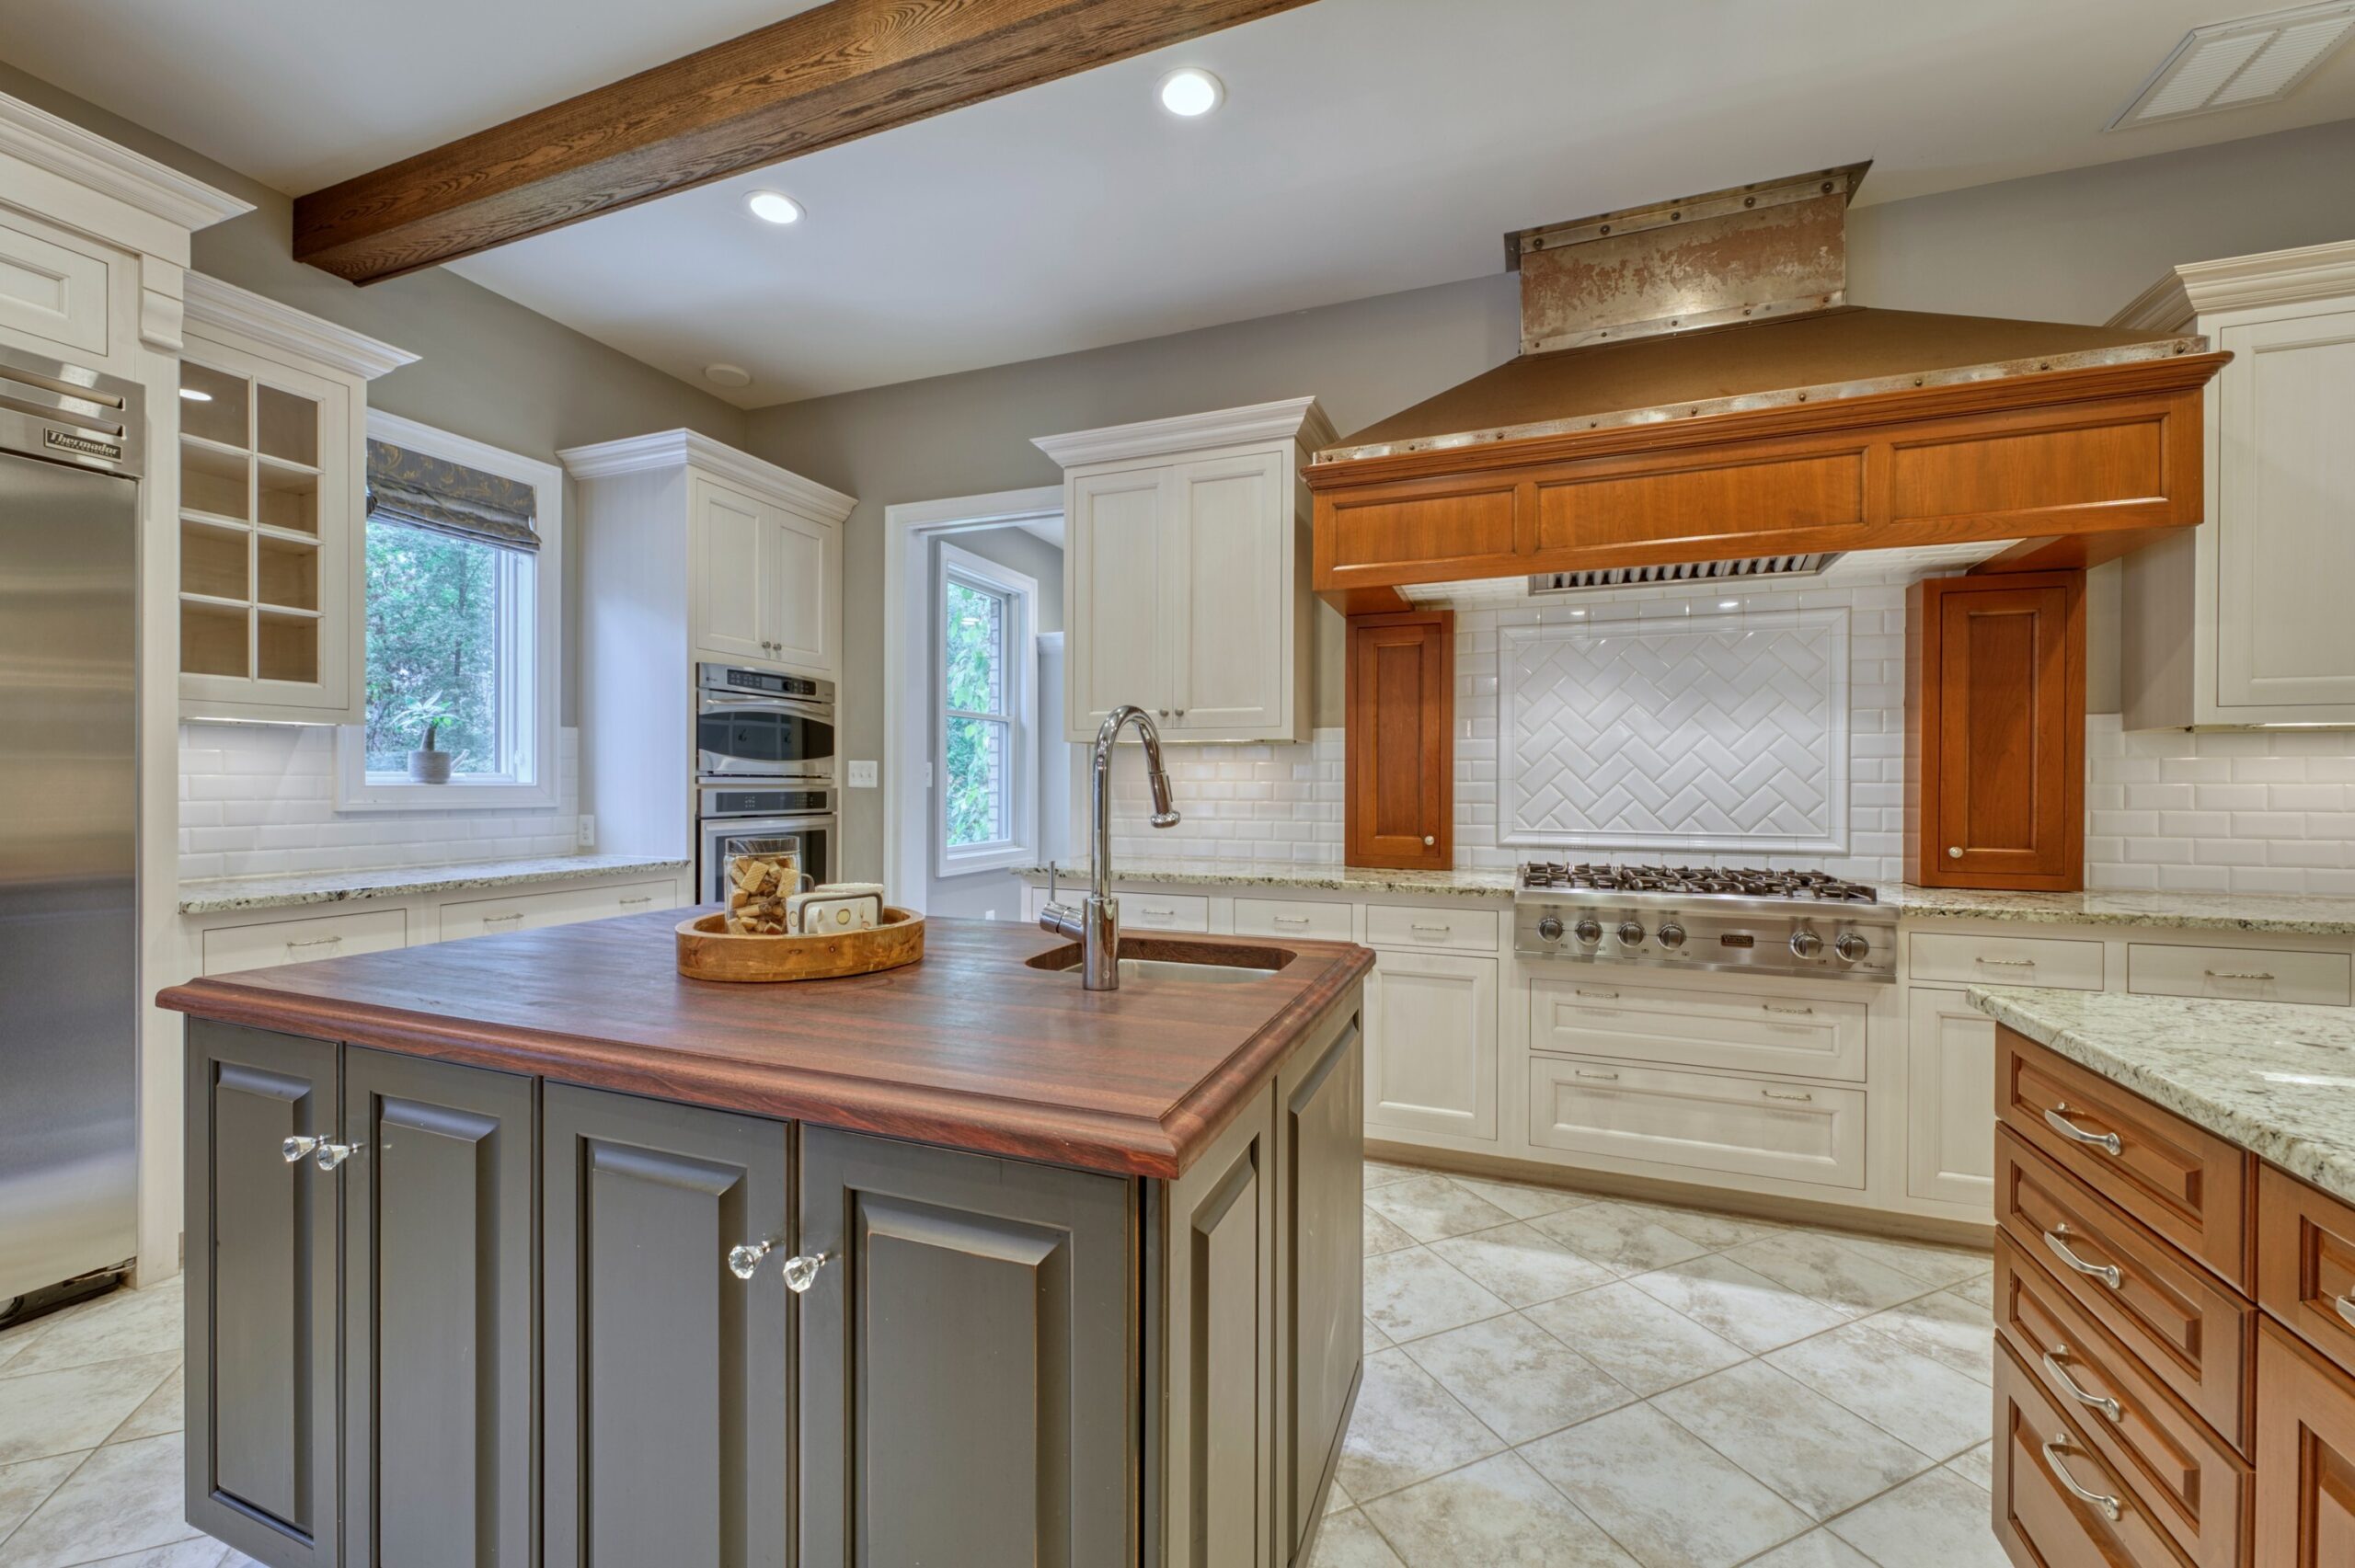 Professional interior photo of 40046 Mount Gilead Rd in Leesburg, Virginia - showing the kitchen with large gas stove and huge custom range hood and island with farm sink and butcher block counter. 